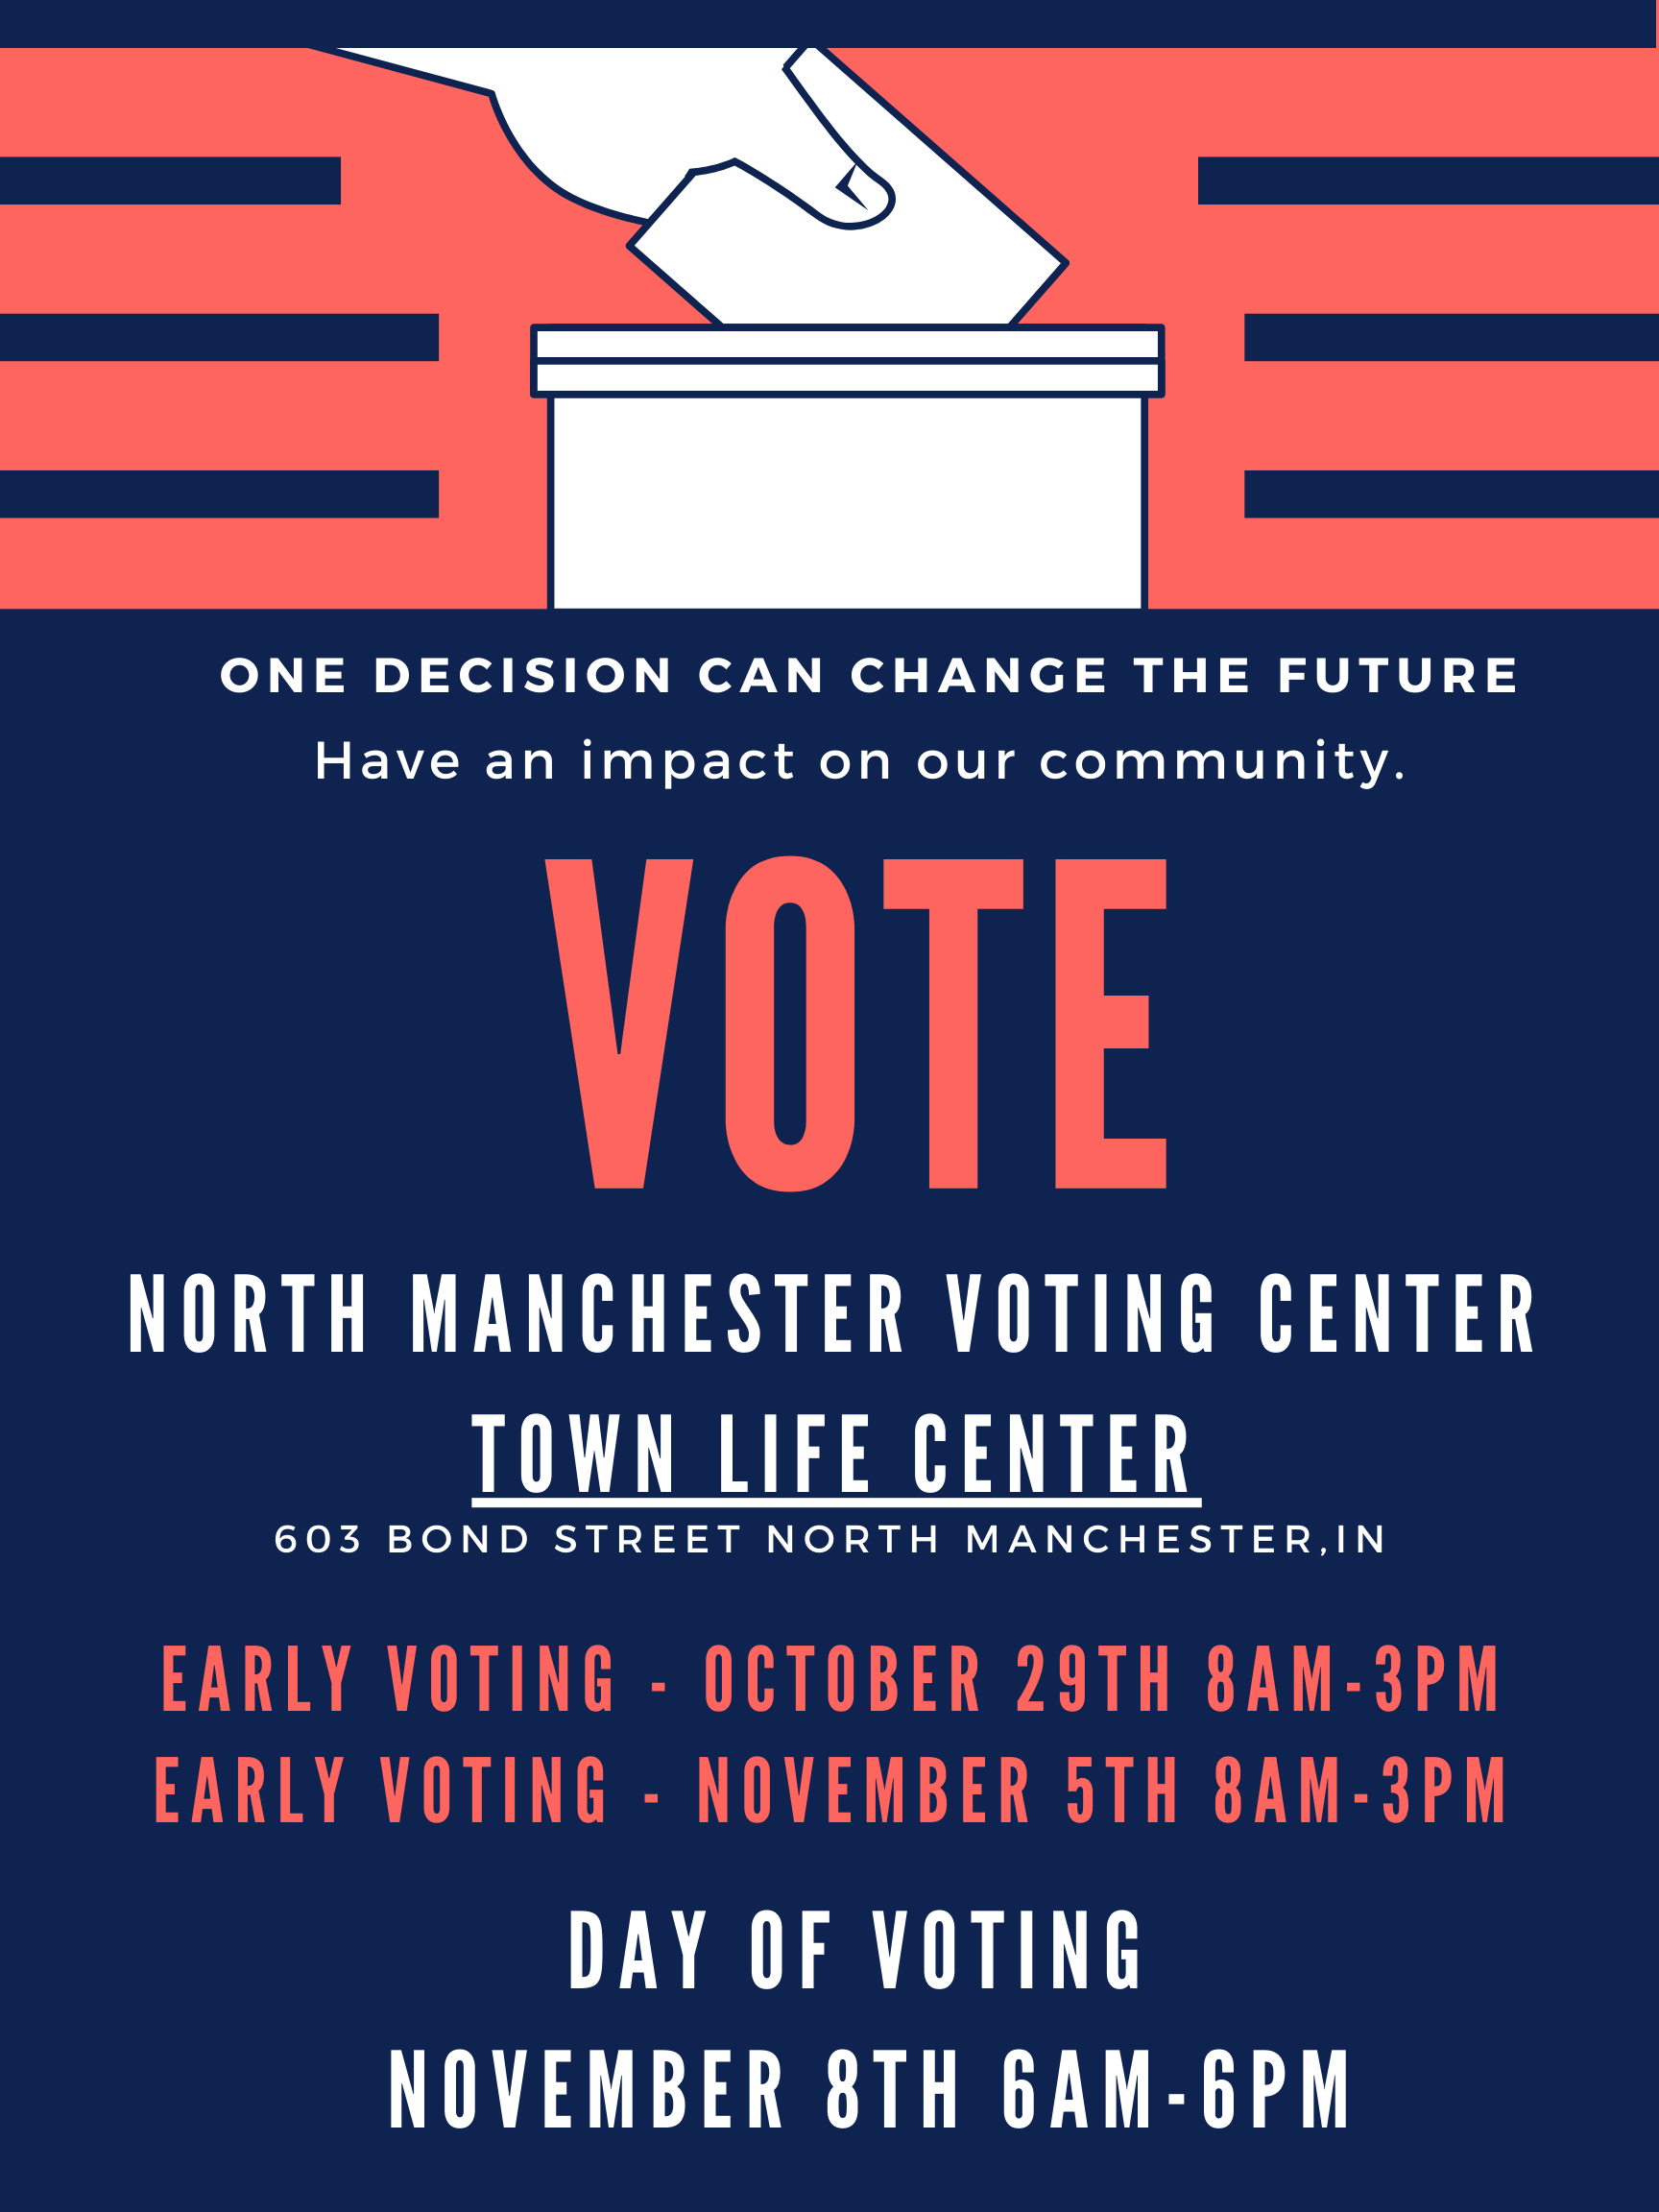 North Manchester's Voting Center